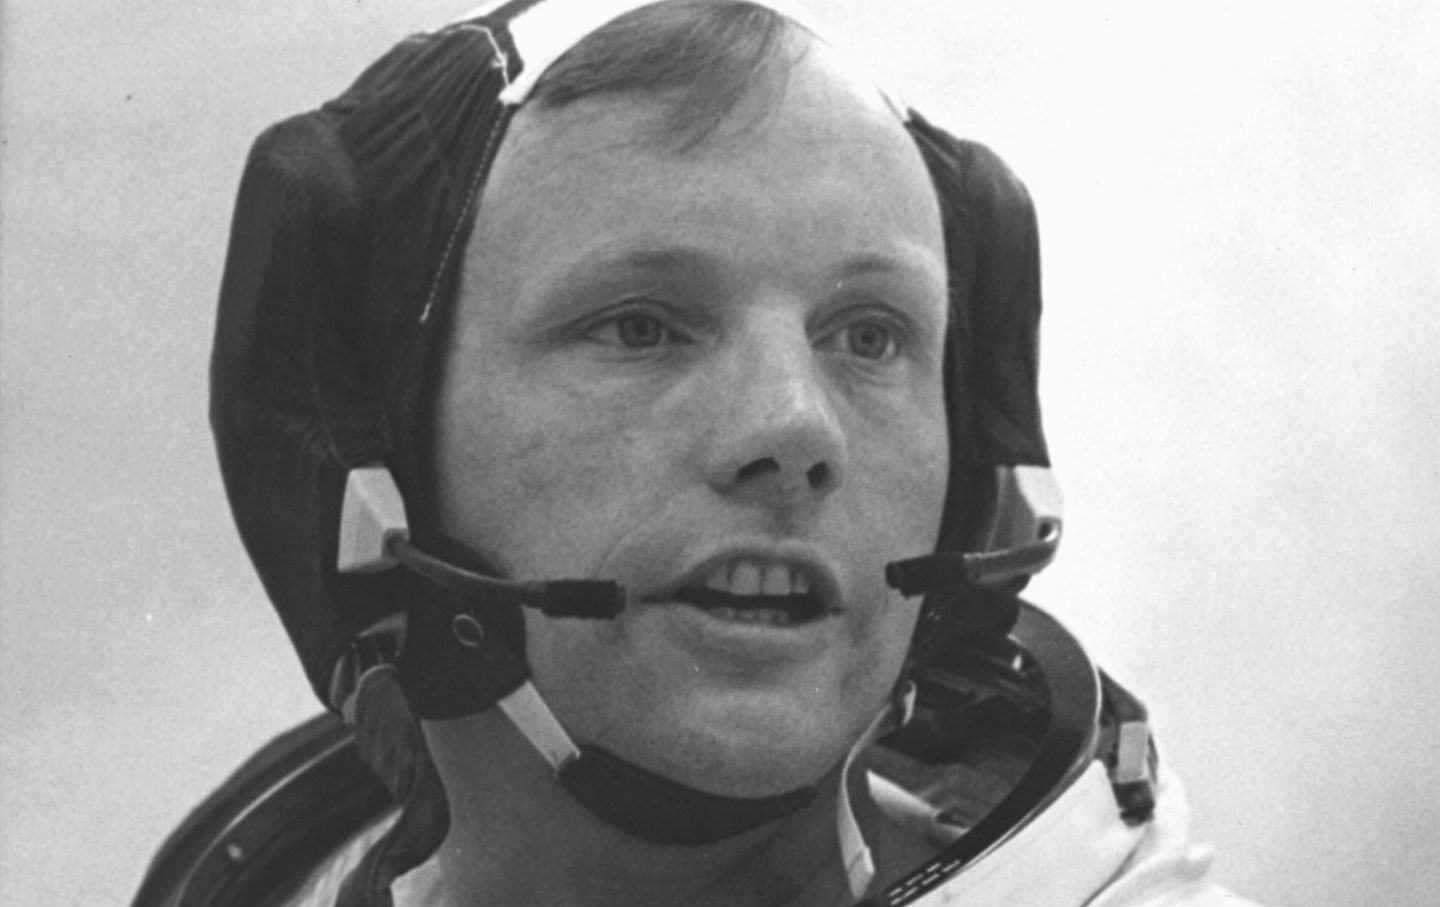 July 20, 1969: Neil Armstrong Becomes the First Human Being to Walk on the Moon